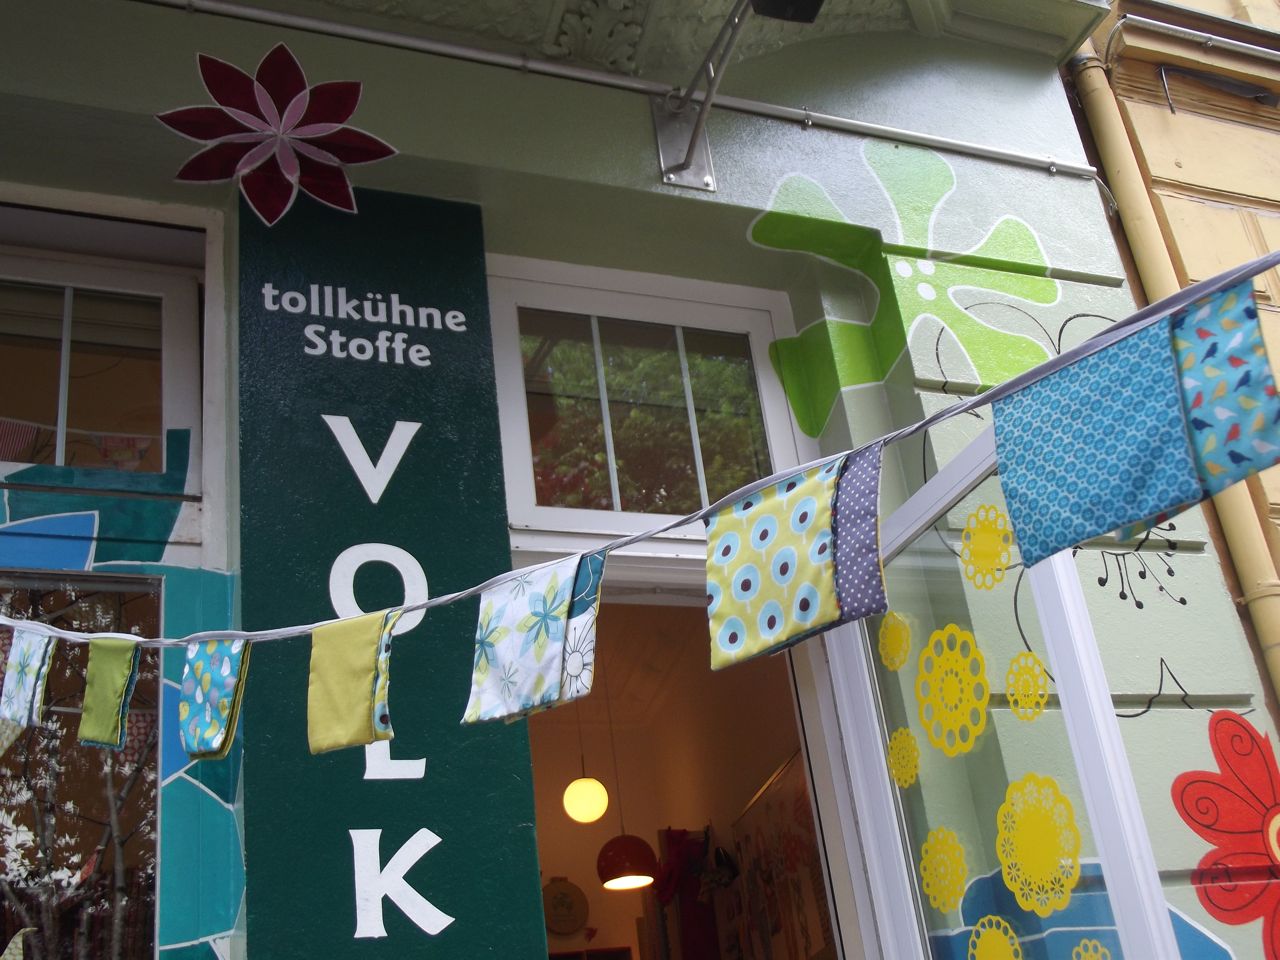 You are currently viewing <!--:en-->Fun loving Textiles!!! at “Volksfaden Fabric Shop” in Berlin’s Schoeneberg district!!!<!--:-->